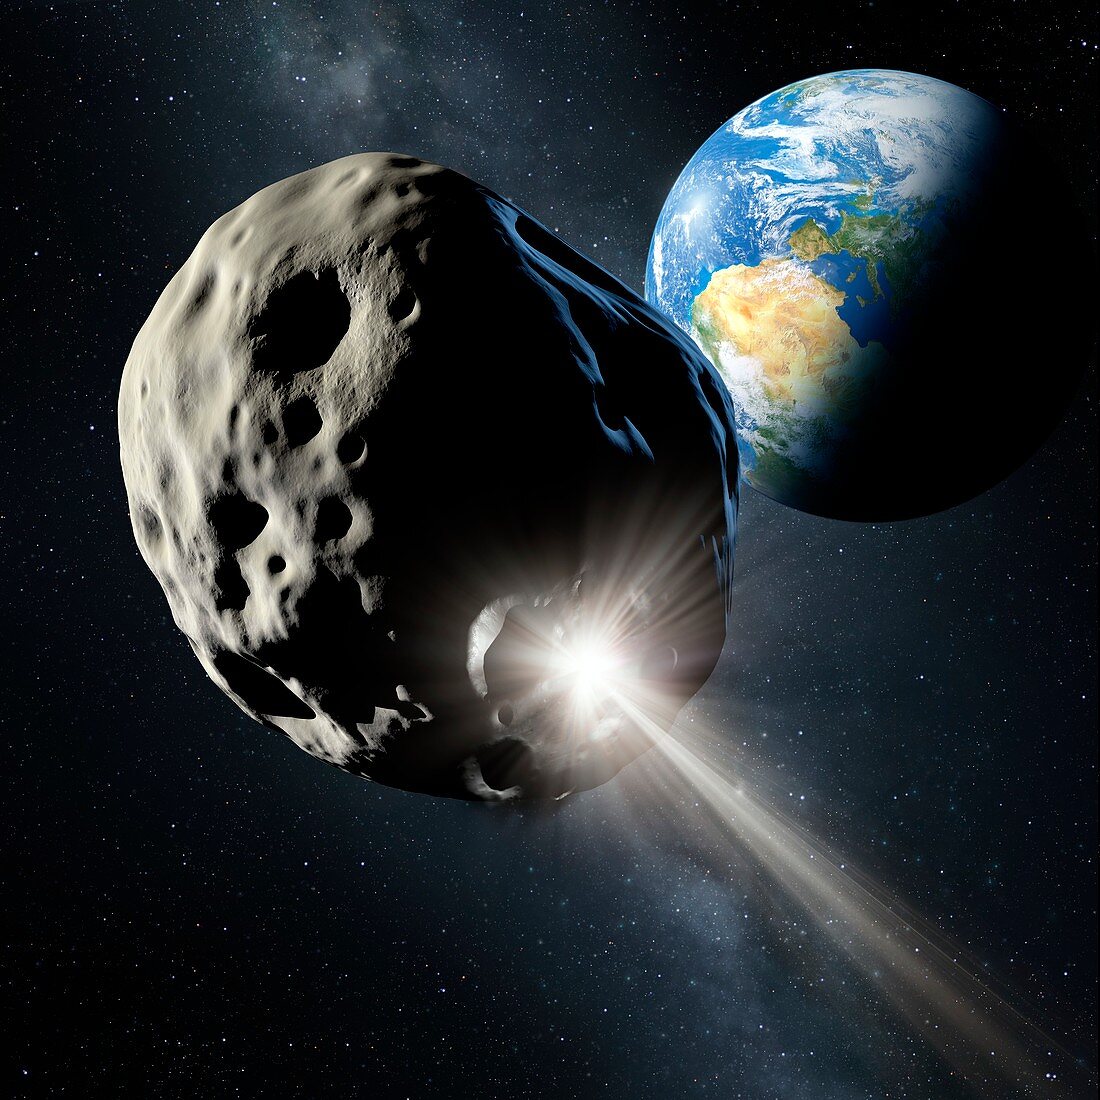 Spacecraft colliding with asteroid